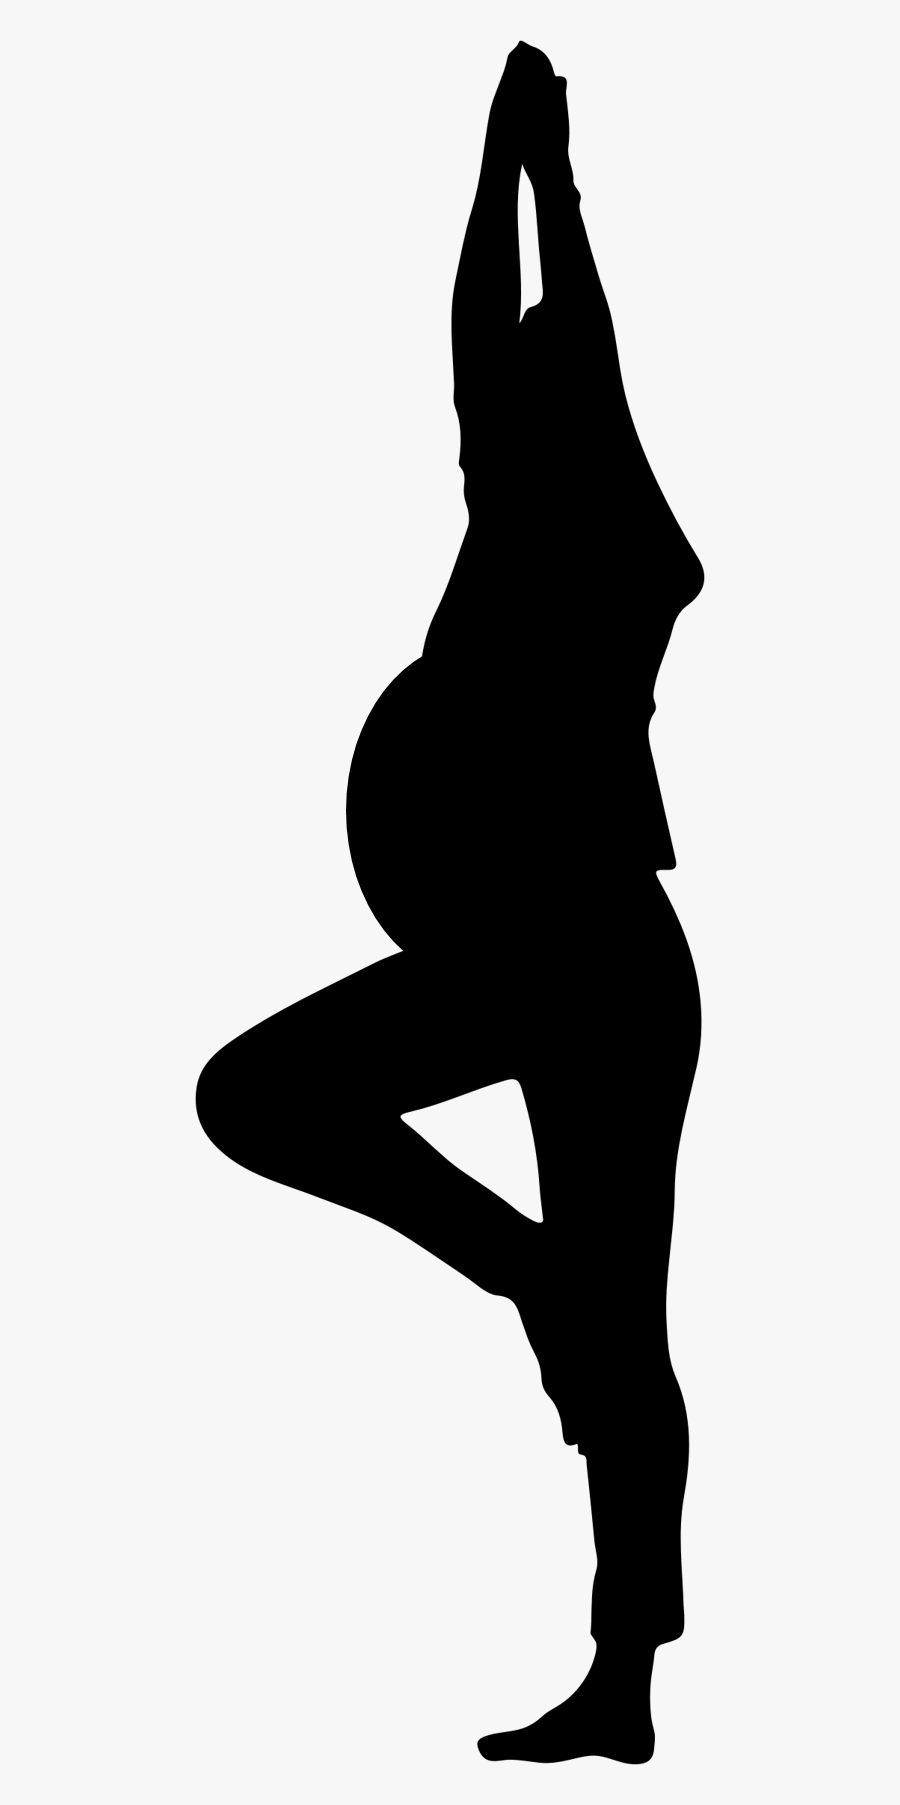 Transparent Strength Clipart - Silhouette Of Yoga Poses Clipart, Transparent Clipart